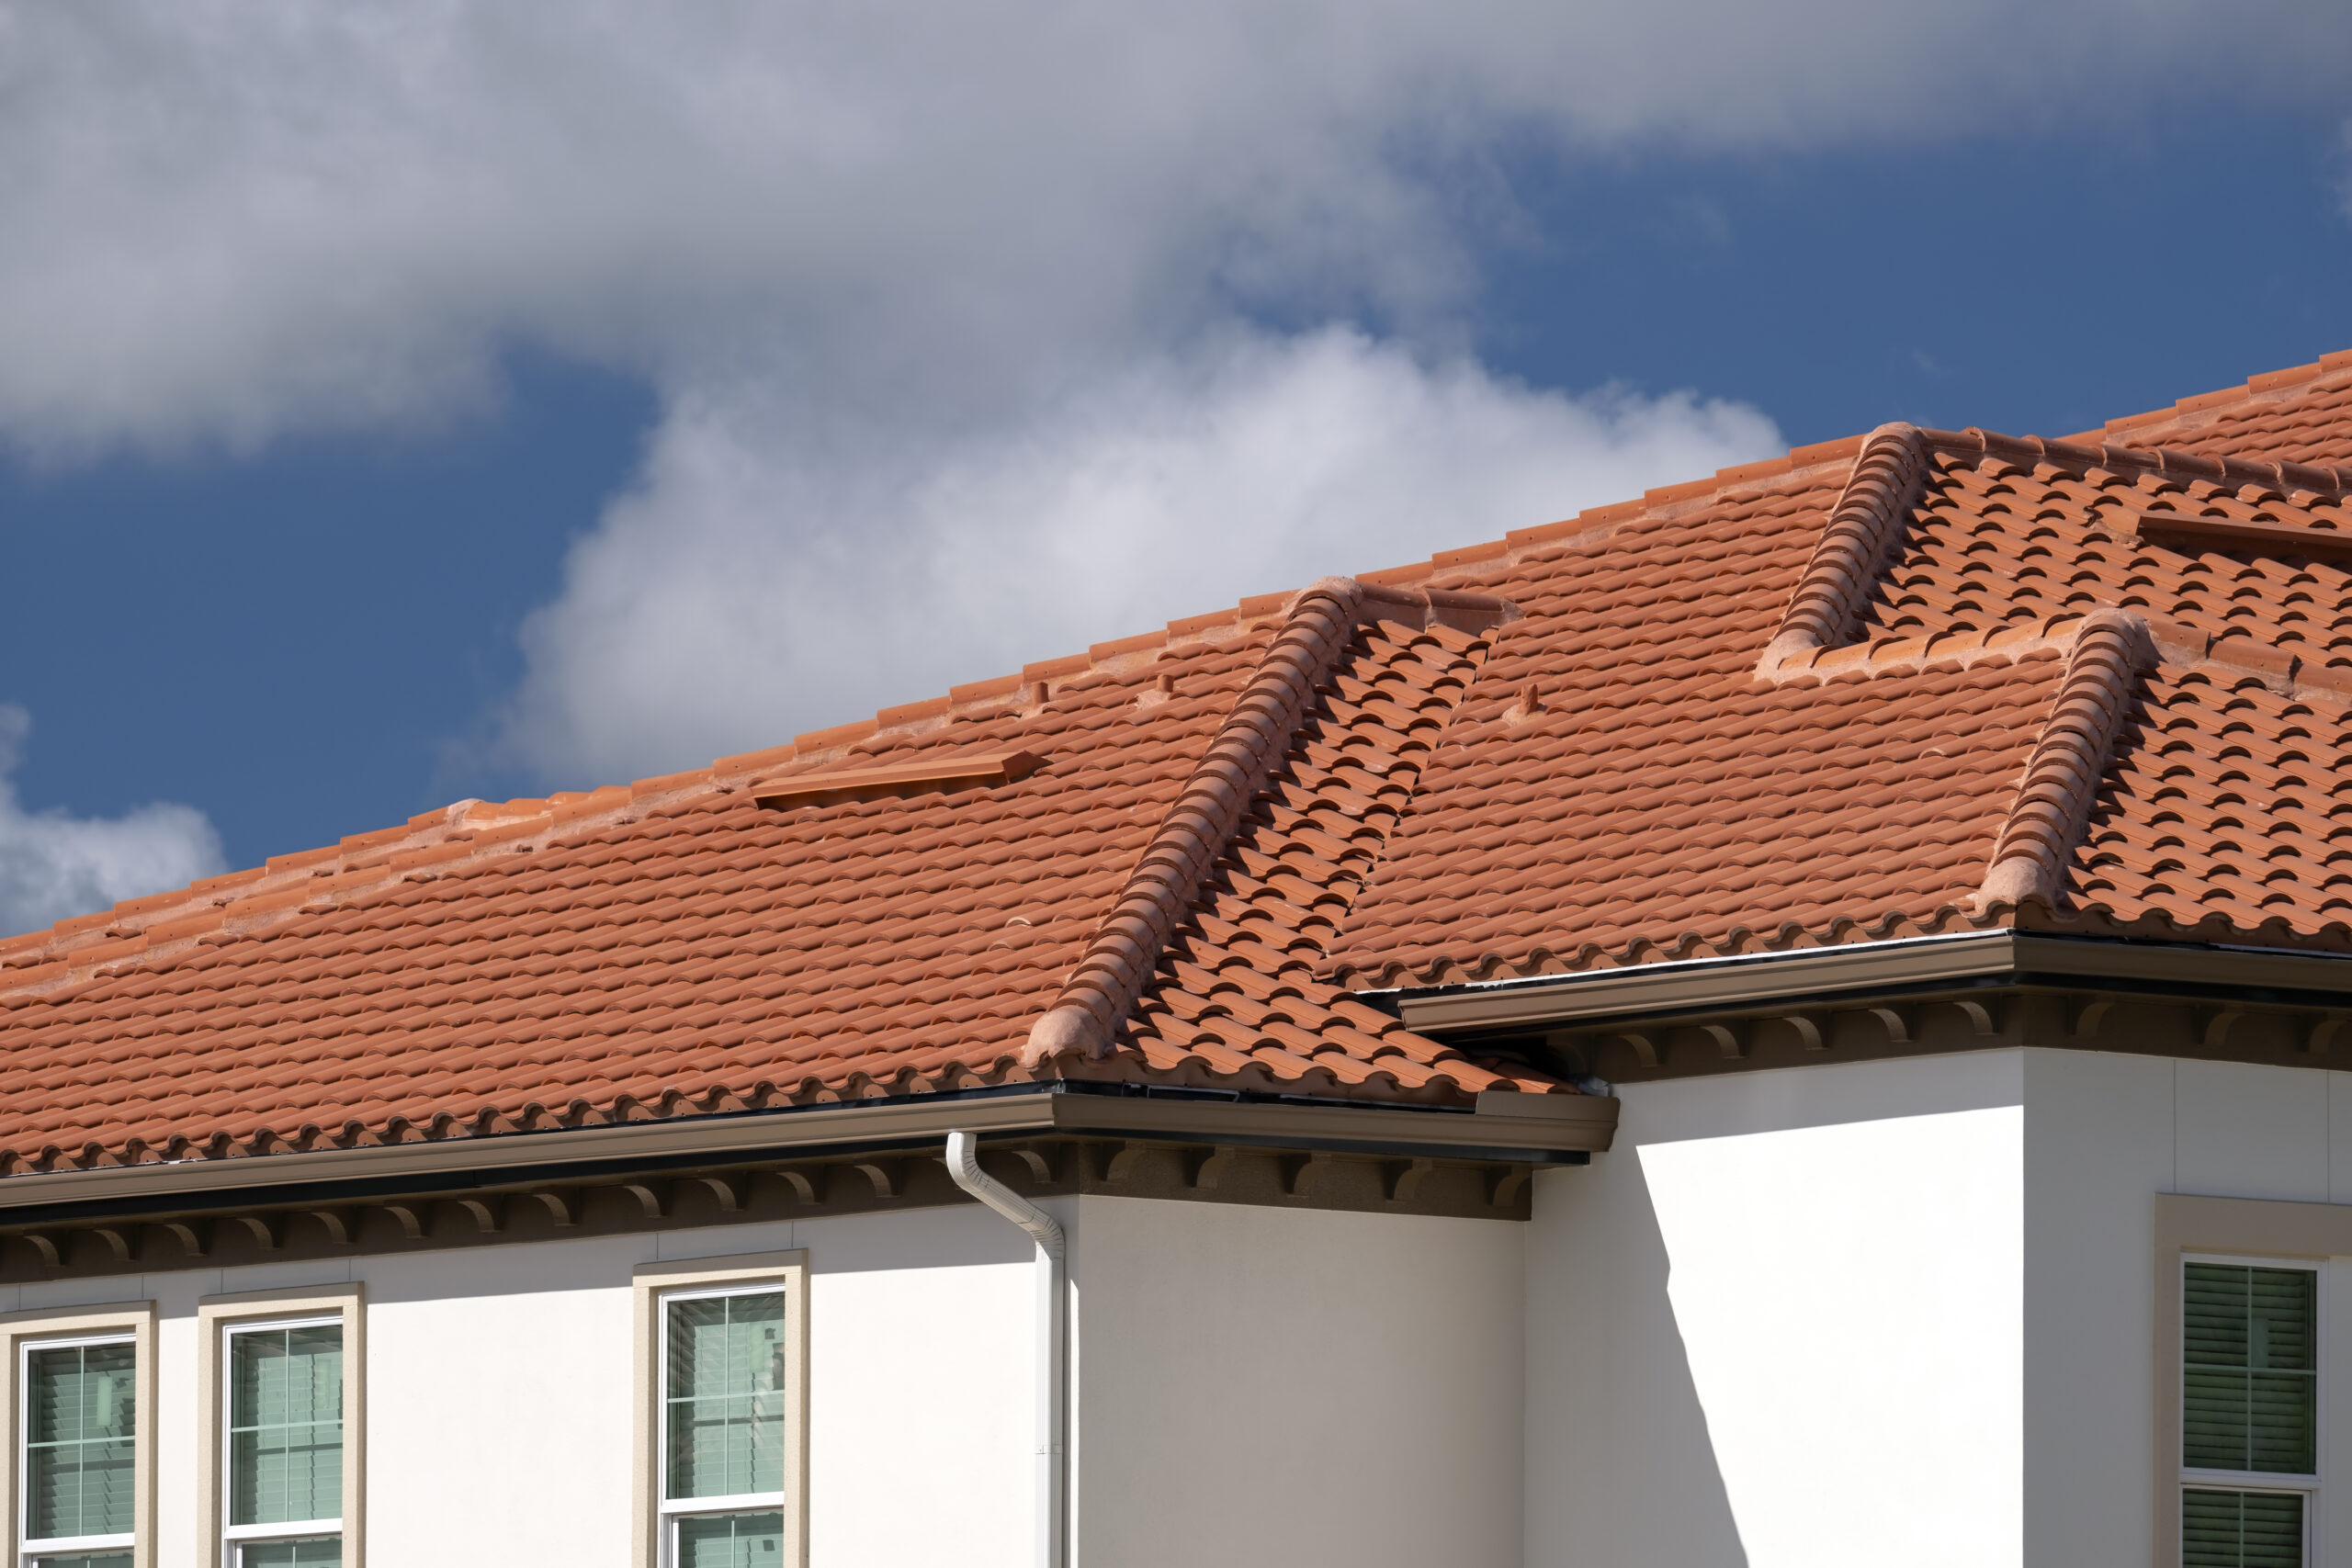 Residential Roofing Company Pompano Beach and Residential Roofing Services